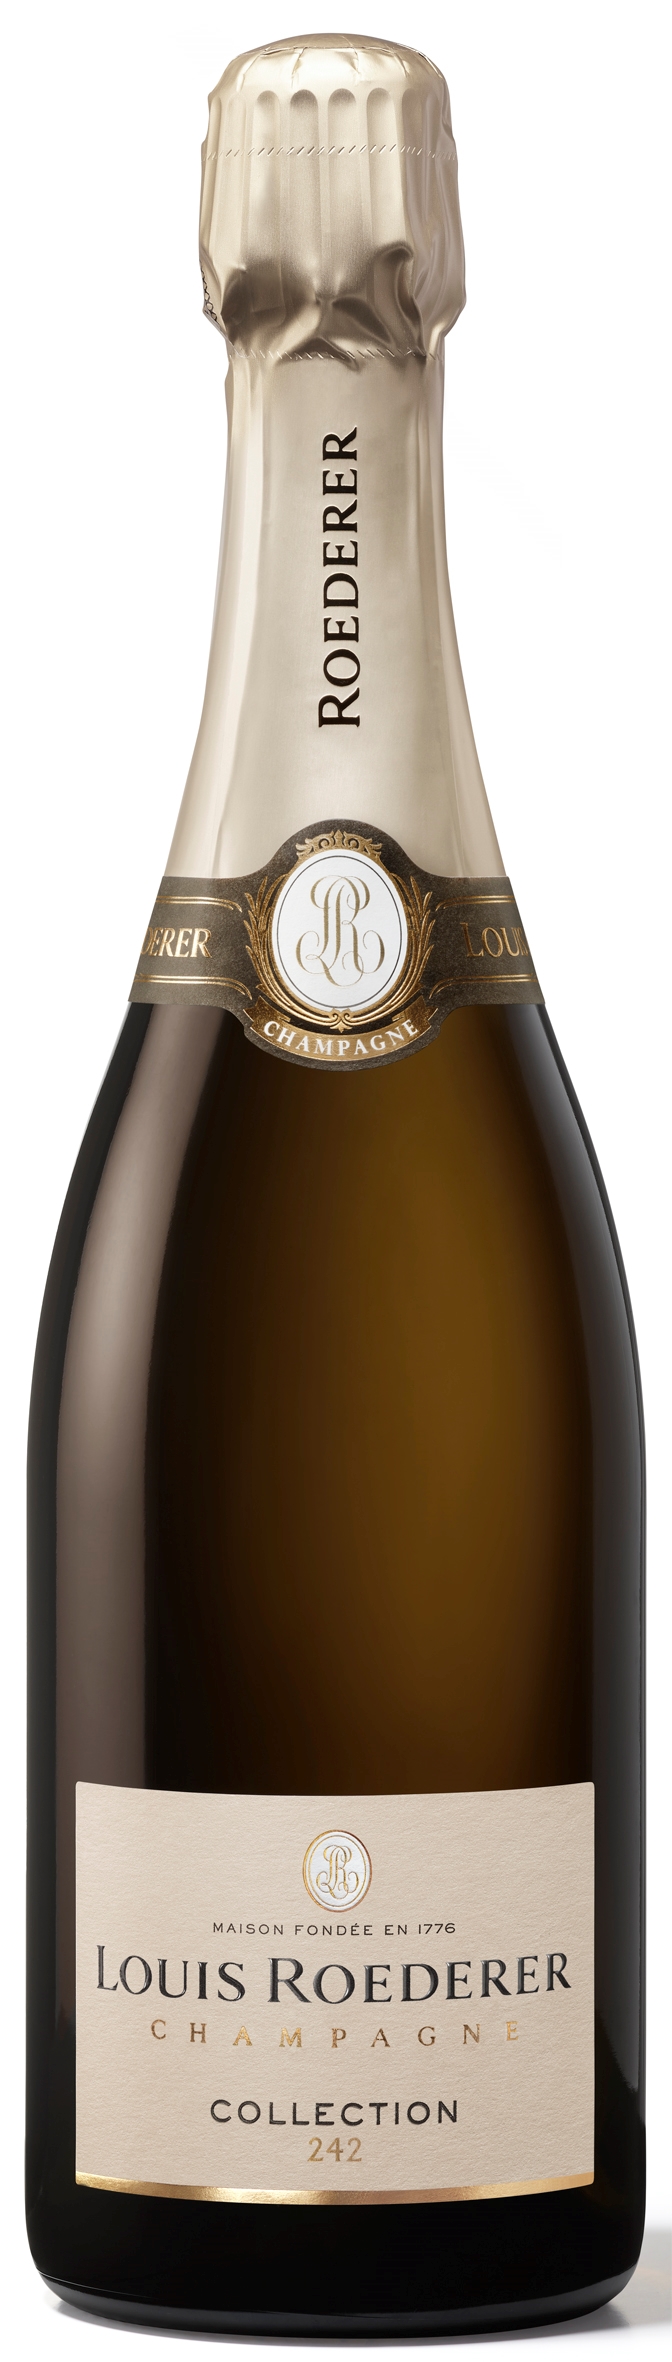 Champagne "Louis Roederer" Collection AOC